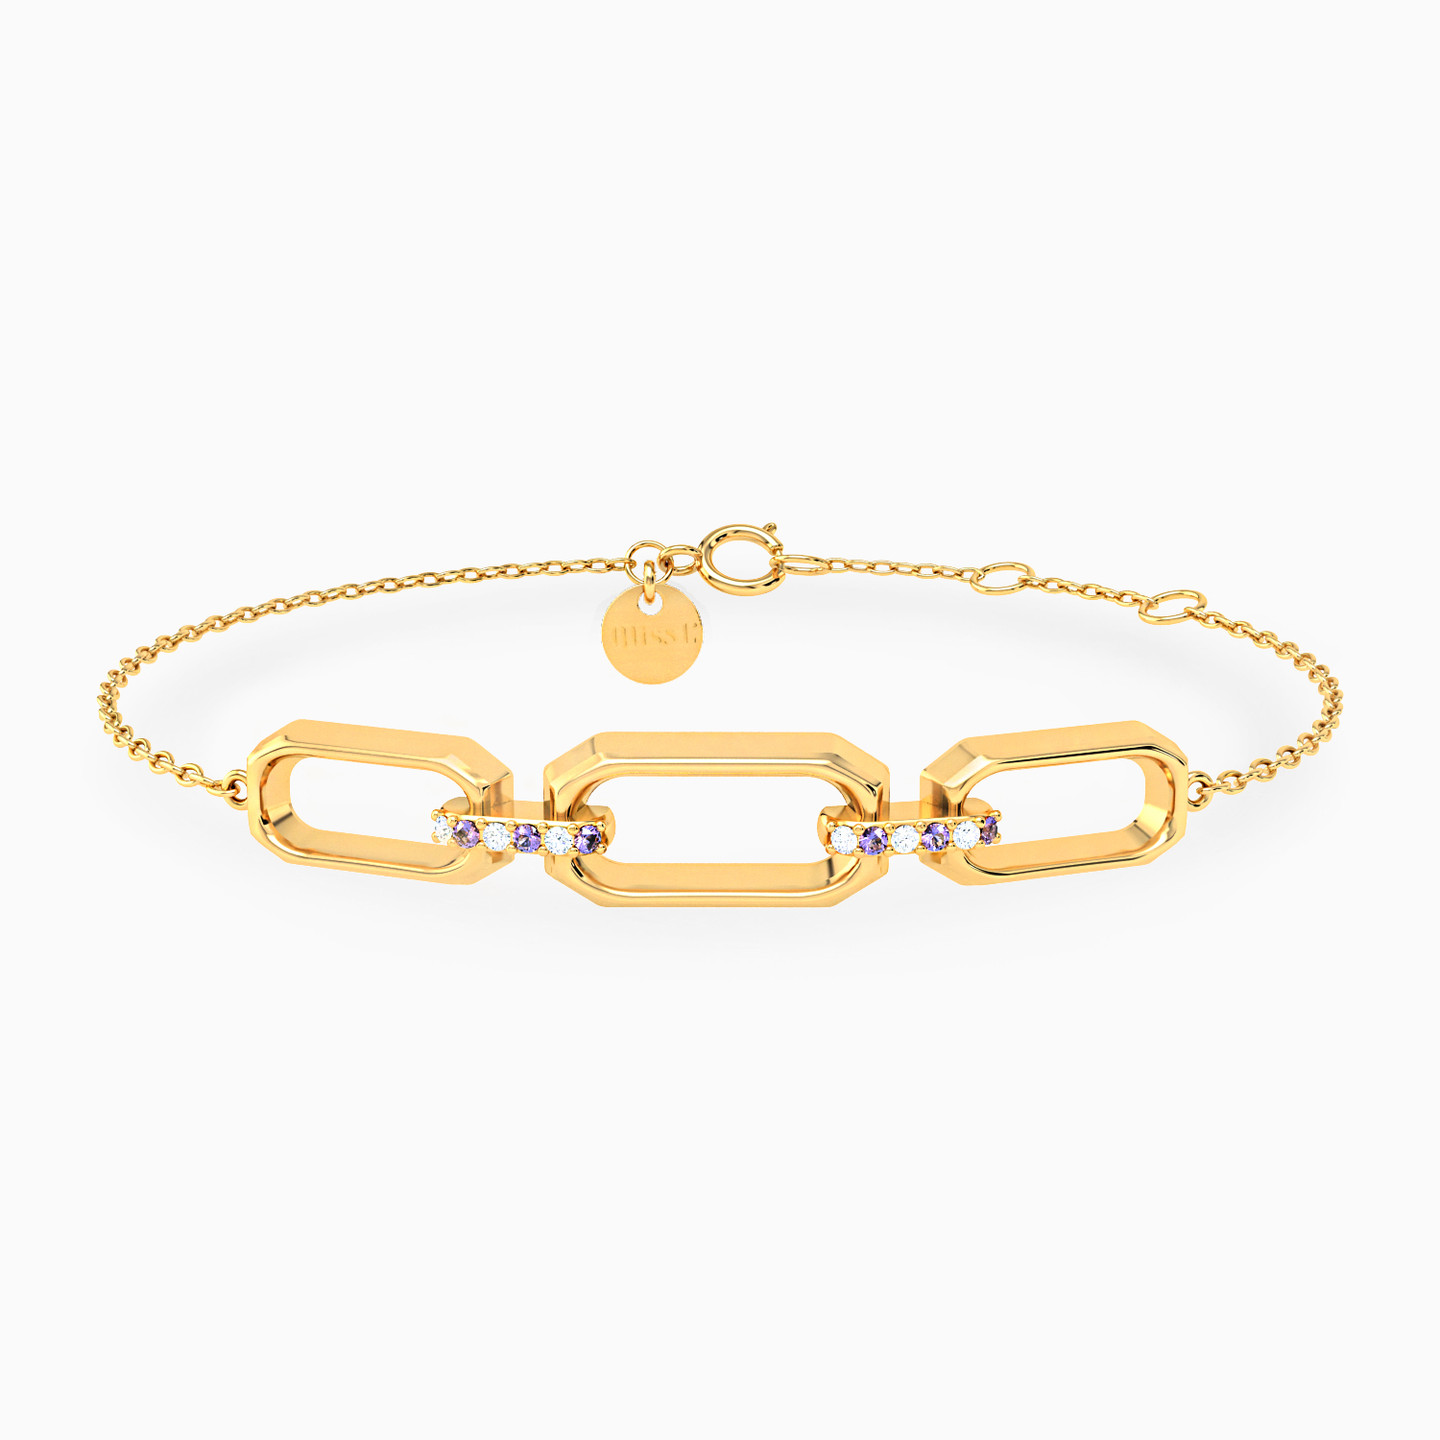 Rectangle Shaped Colored Stones Chain Bracelet in 18K Gold